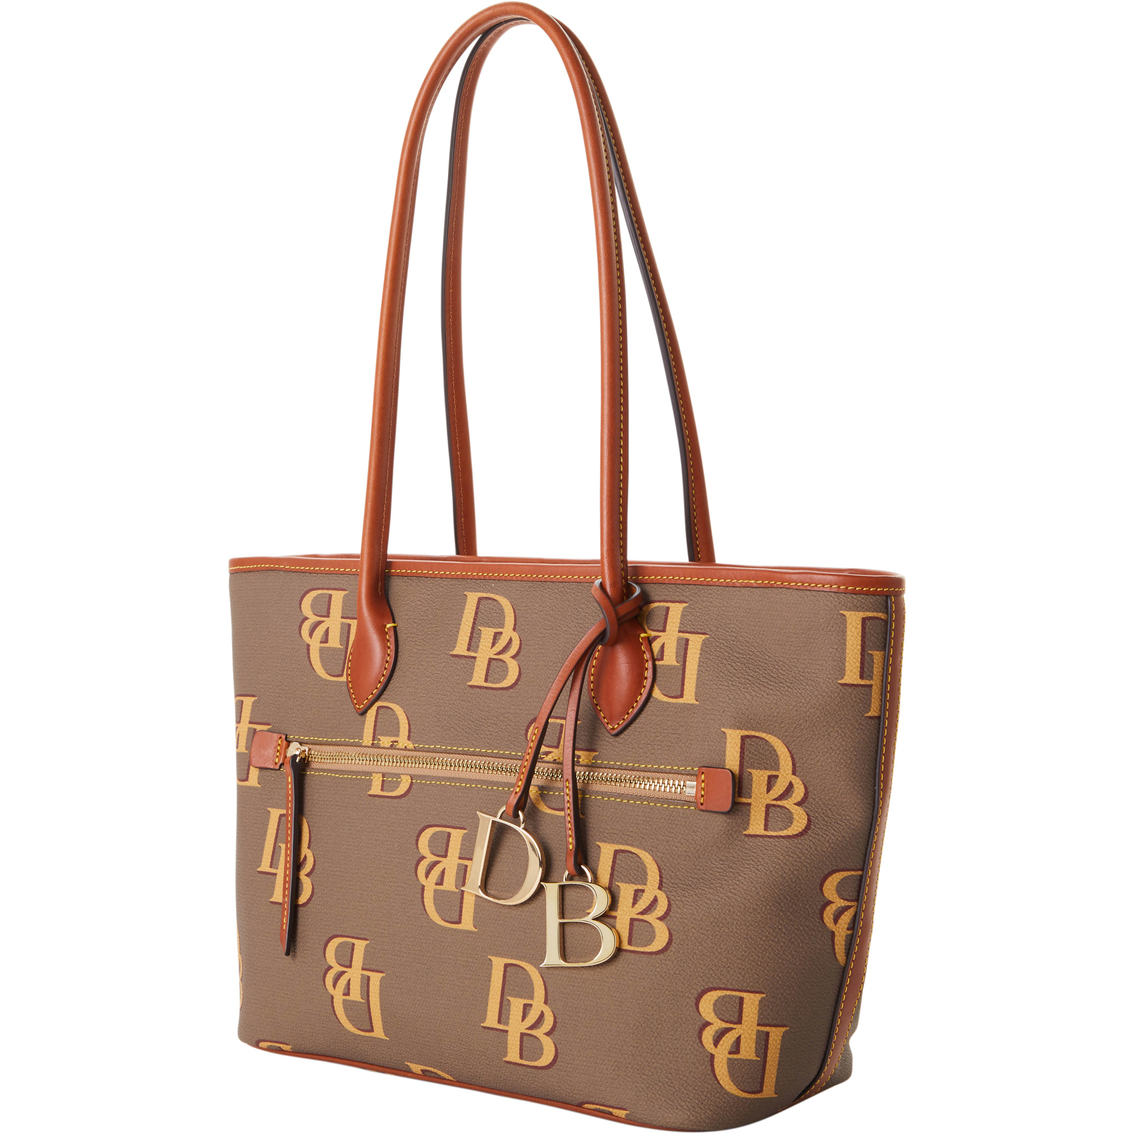 Dooney & Bourke Monogram Tote | Totes & Shoppers | Clothing ...